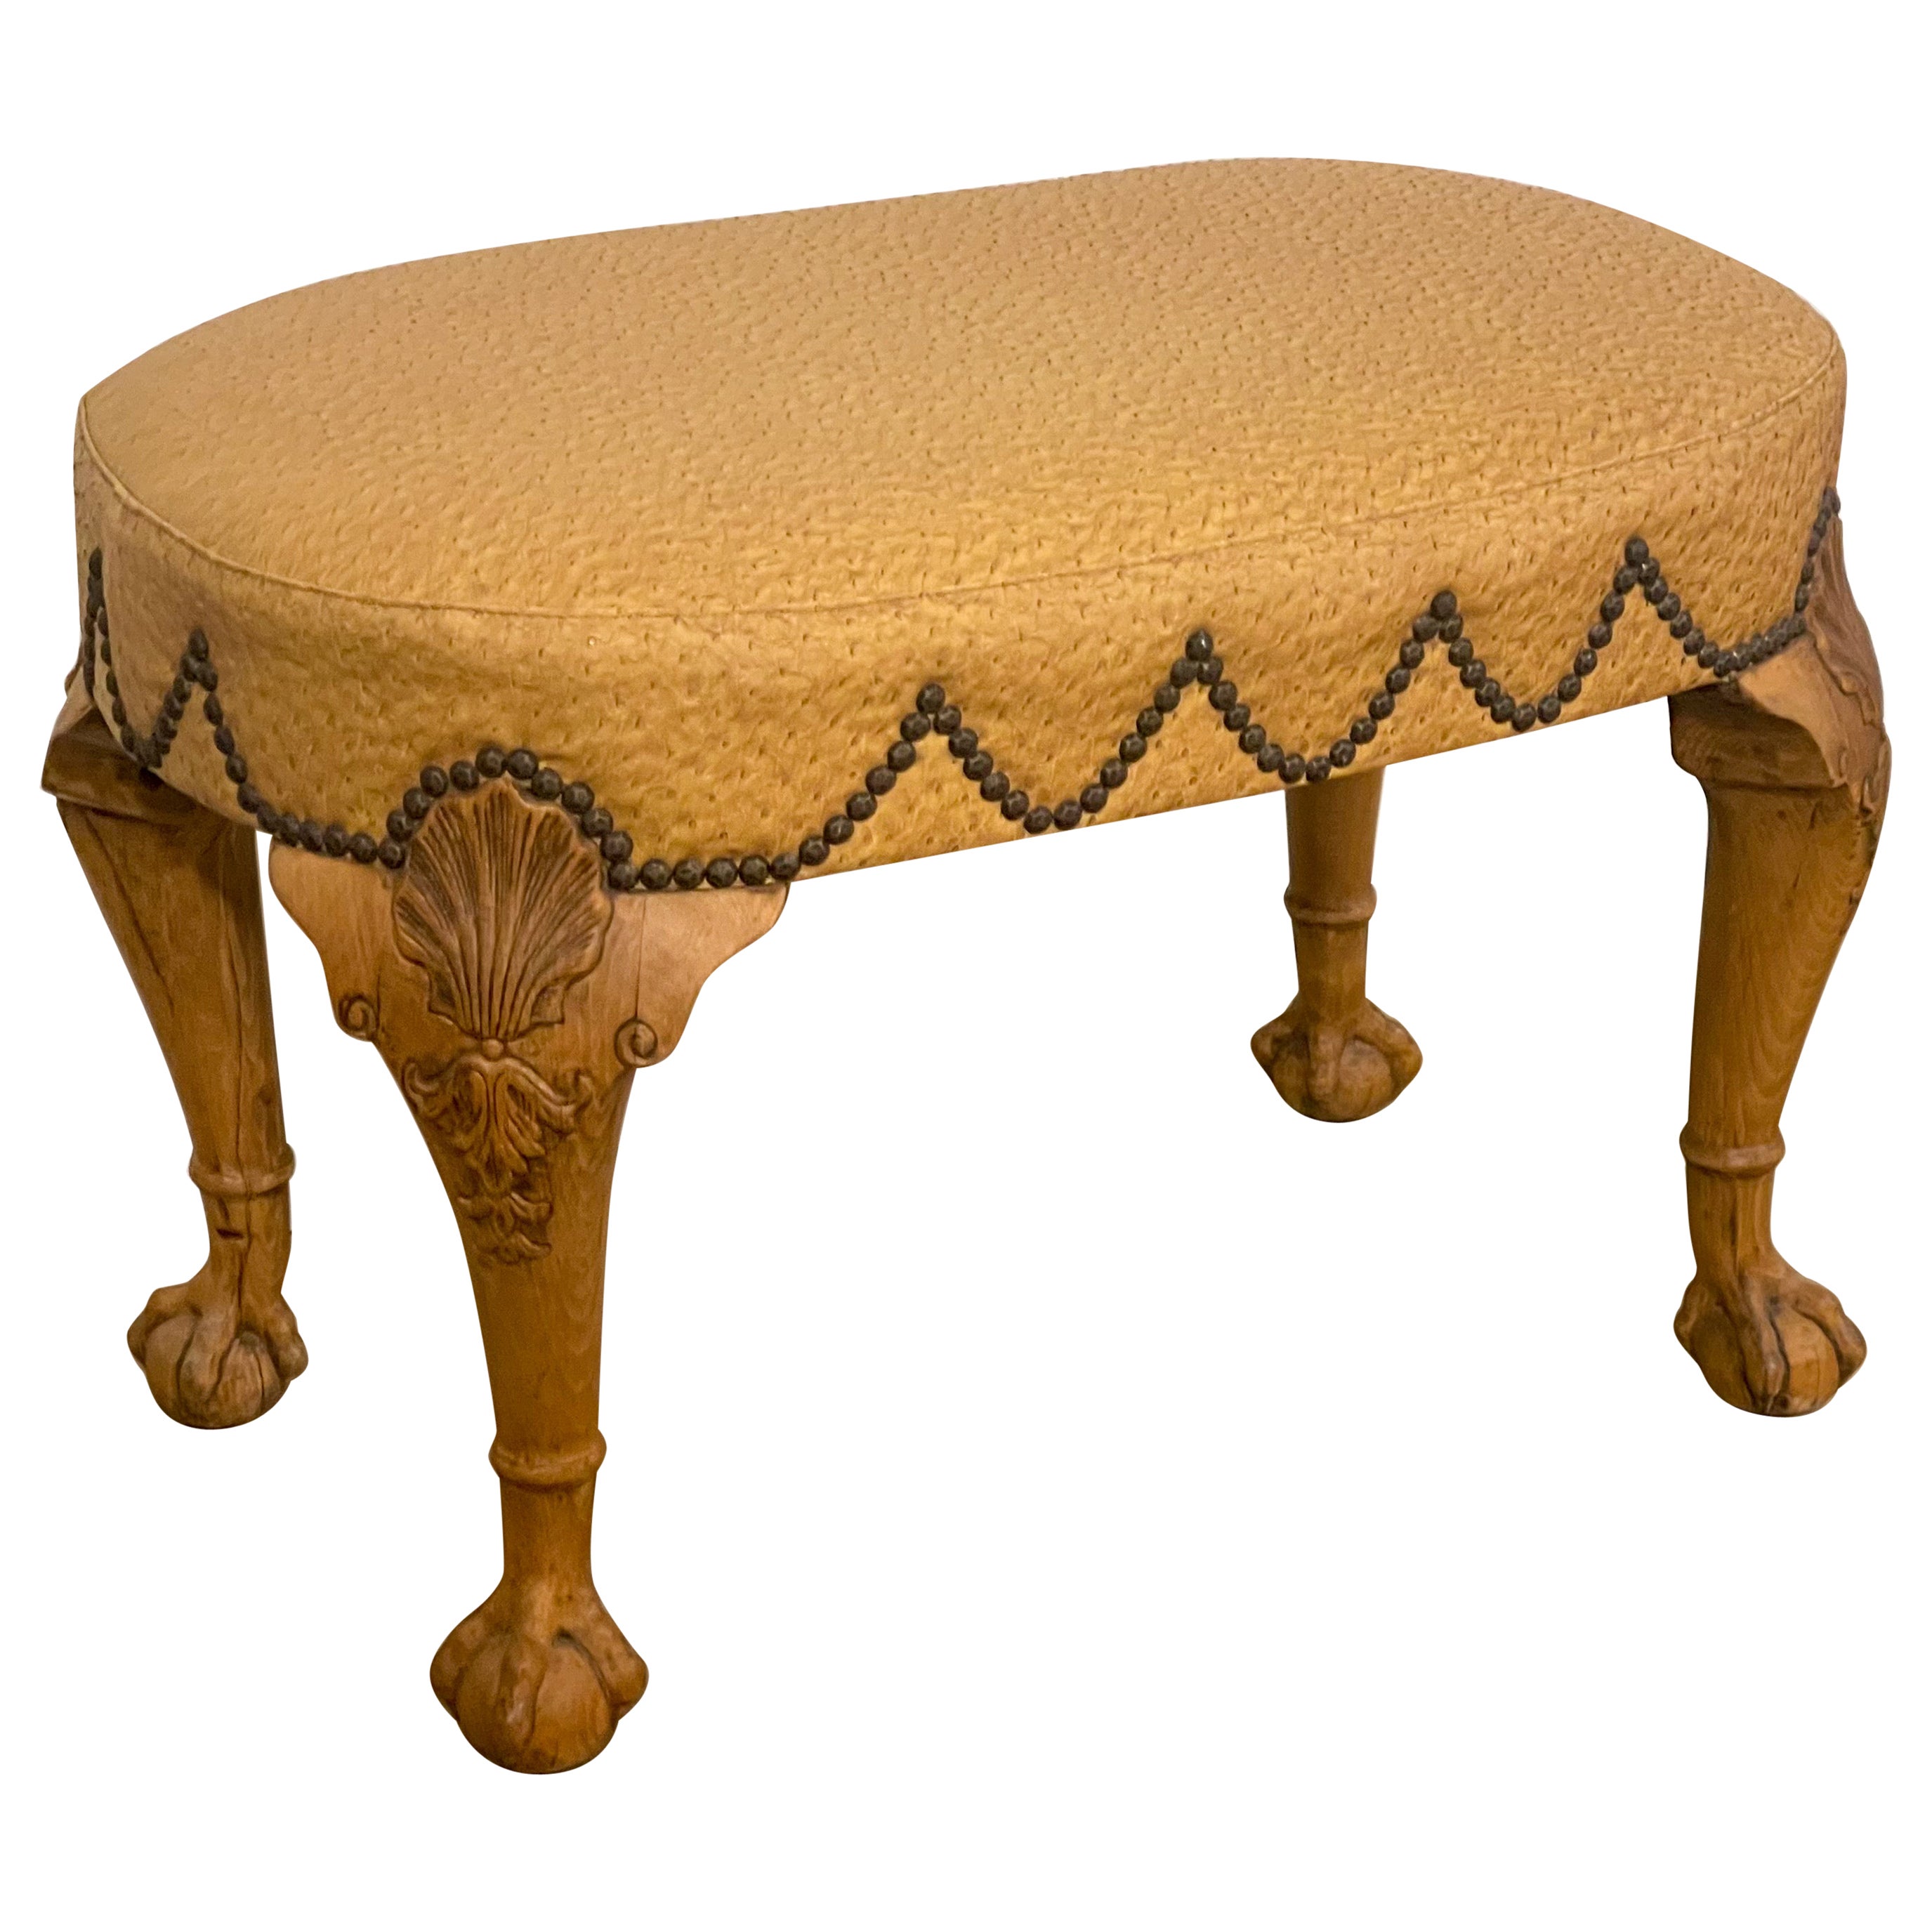 English Georgian Style Carved Fruitwood Bench / Ottoman in Ostrich Leather